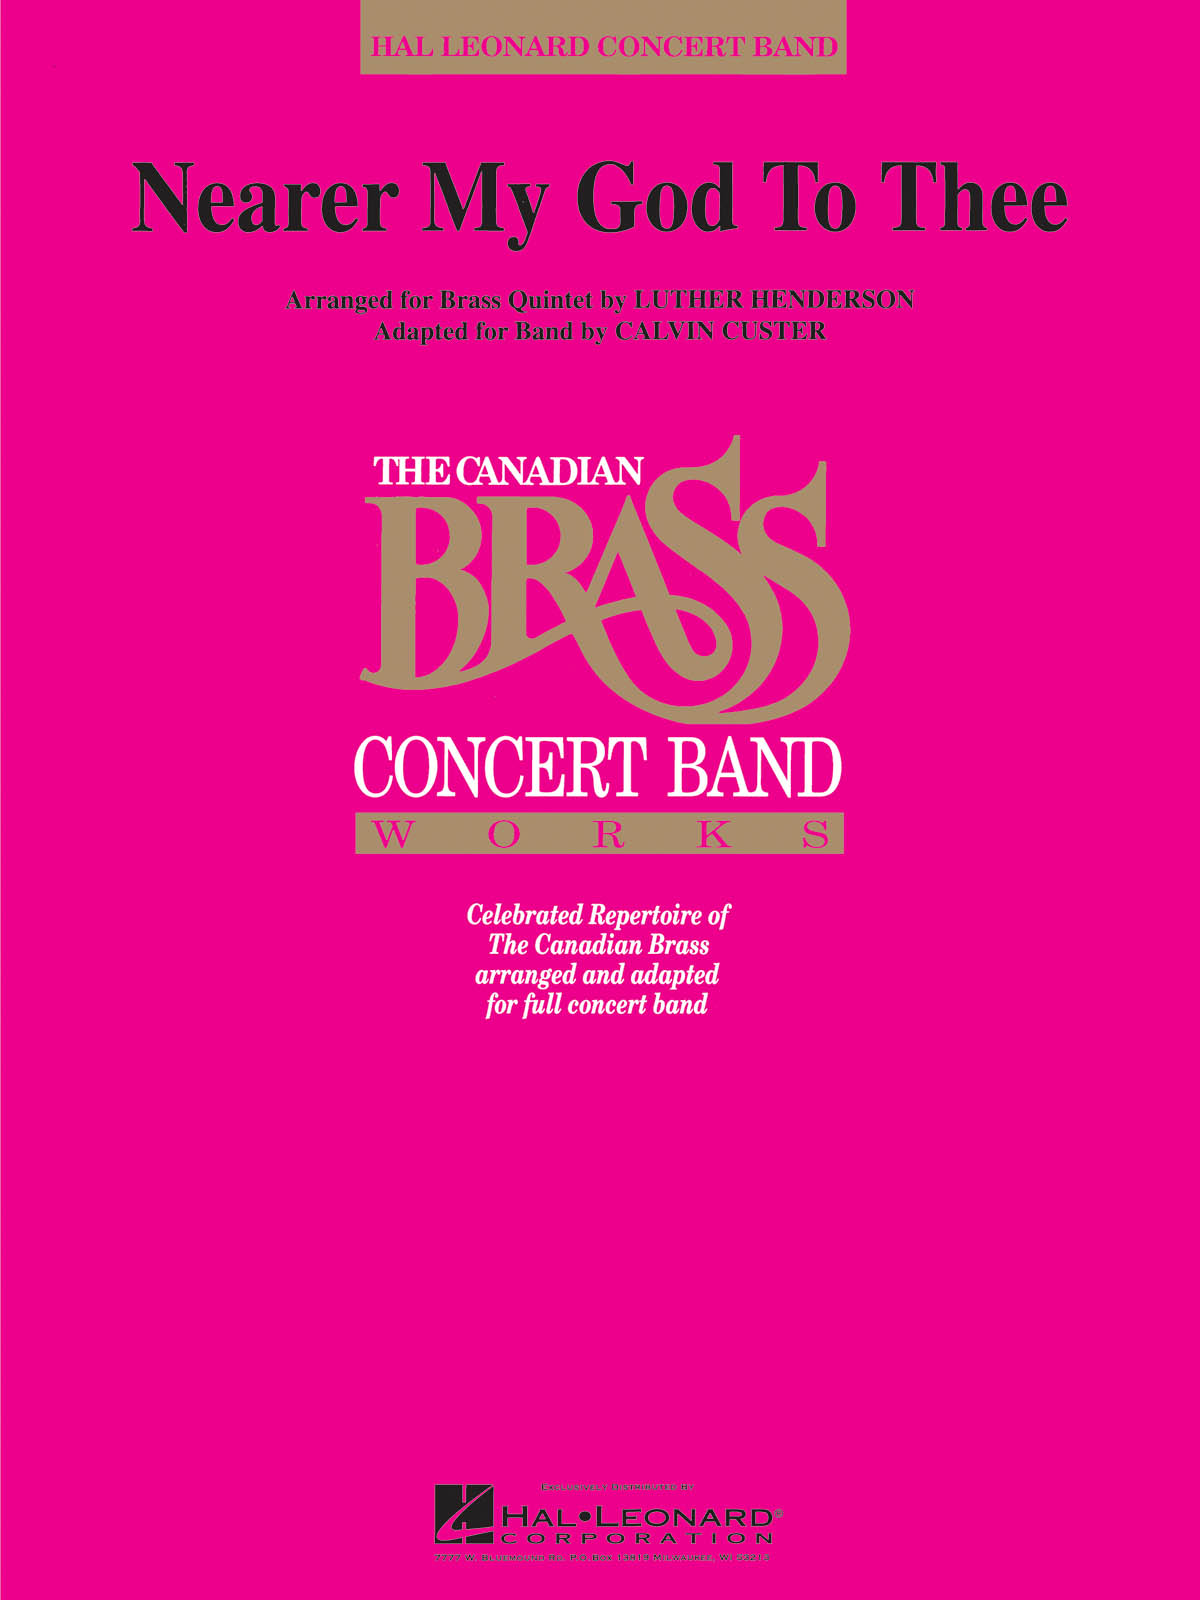 Luther Henderson: Nearer My God to Thee: Concert Band: Score & Parts